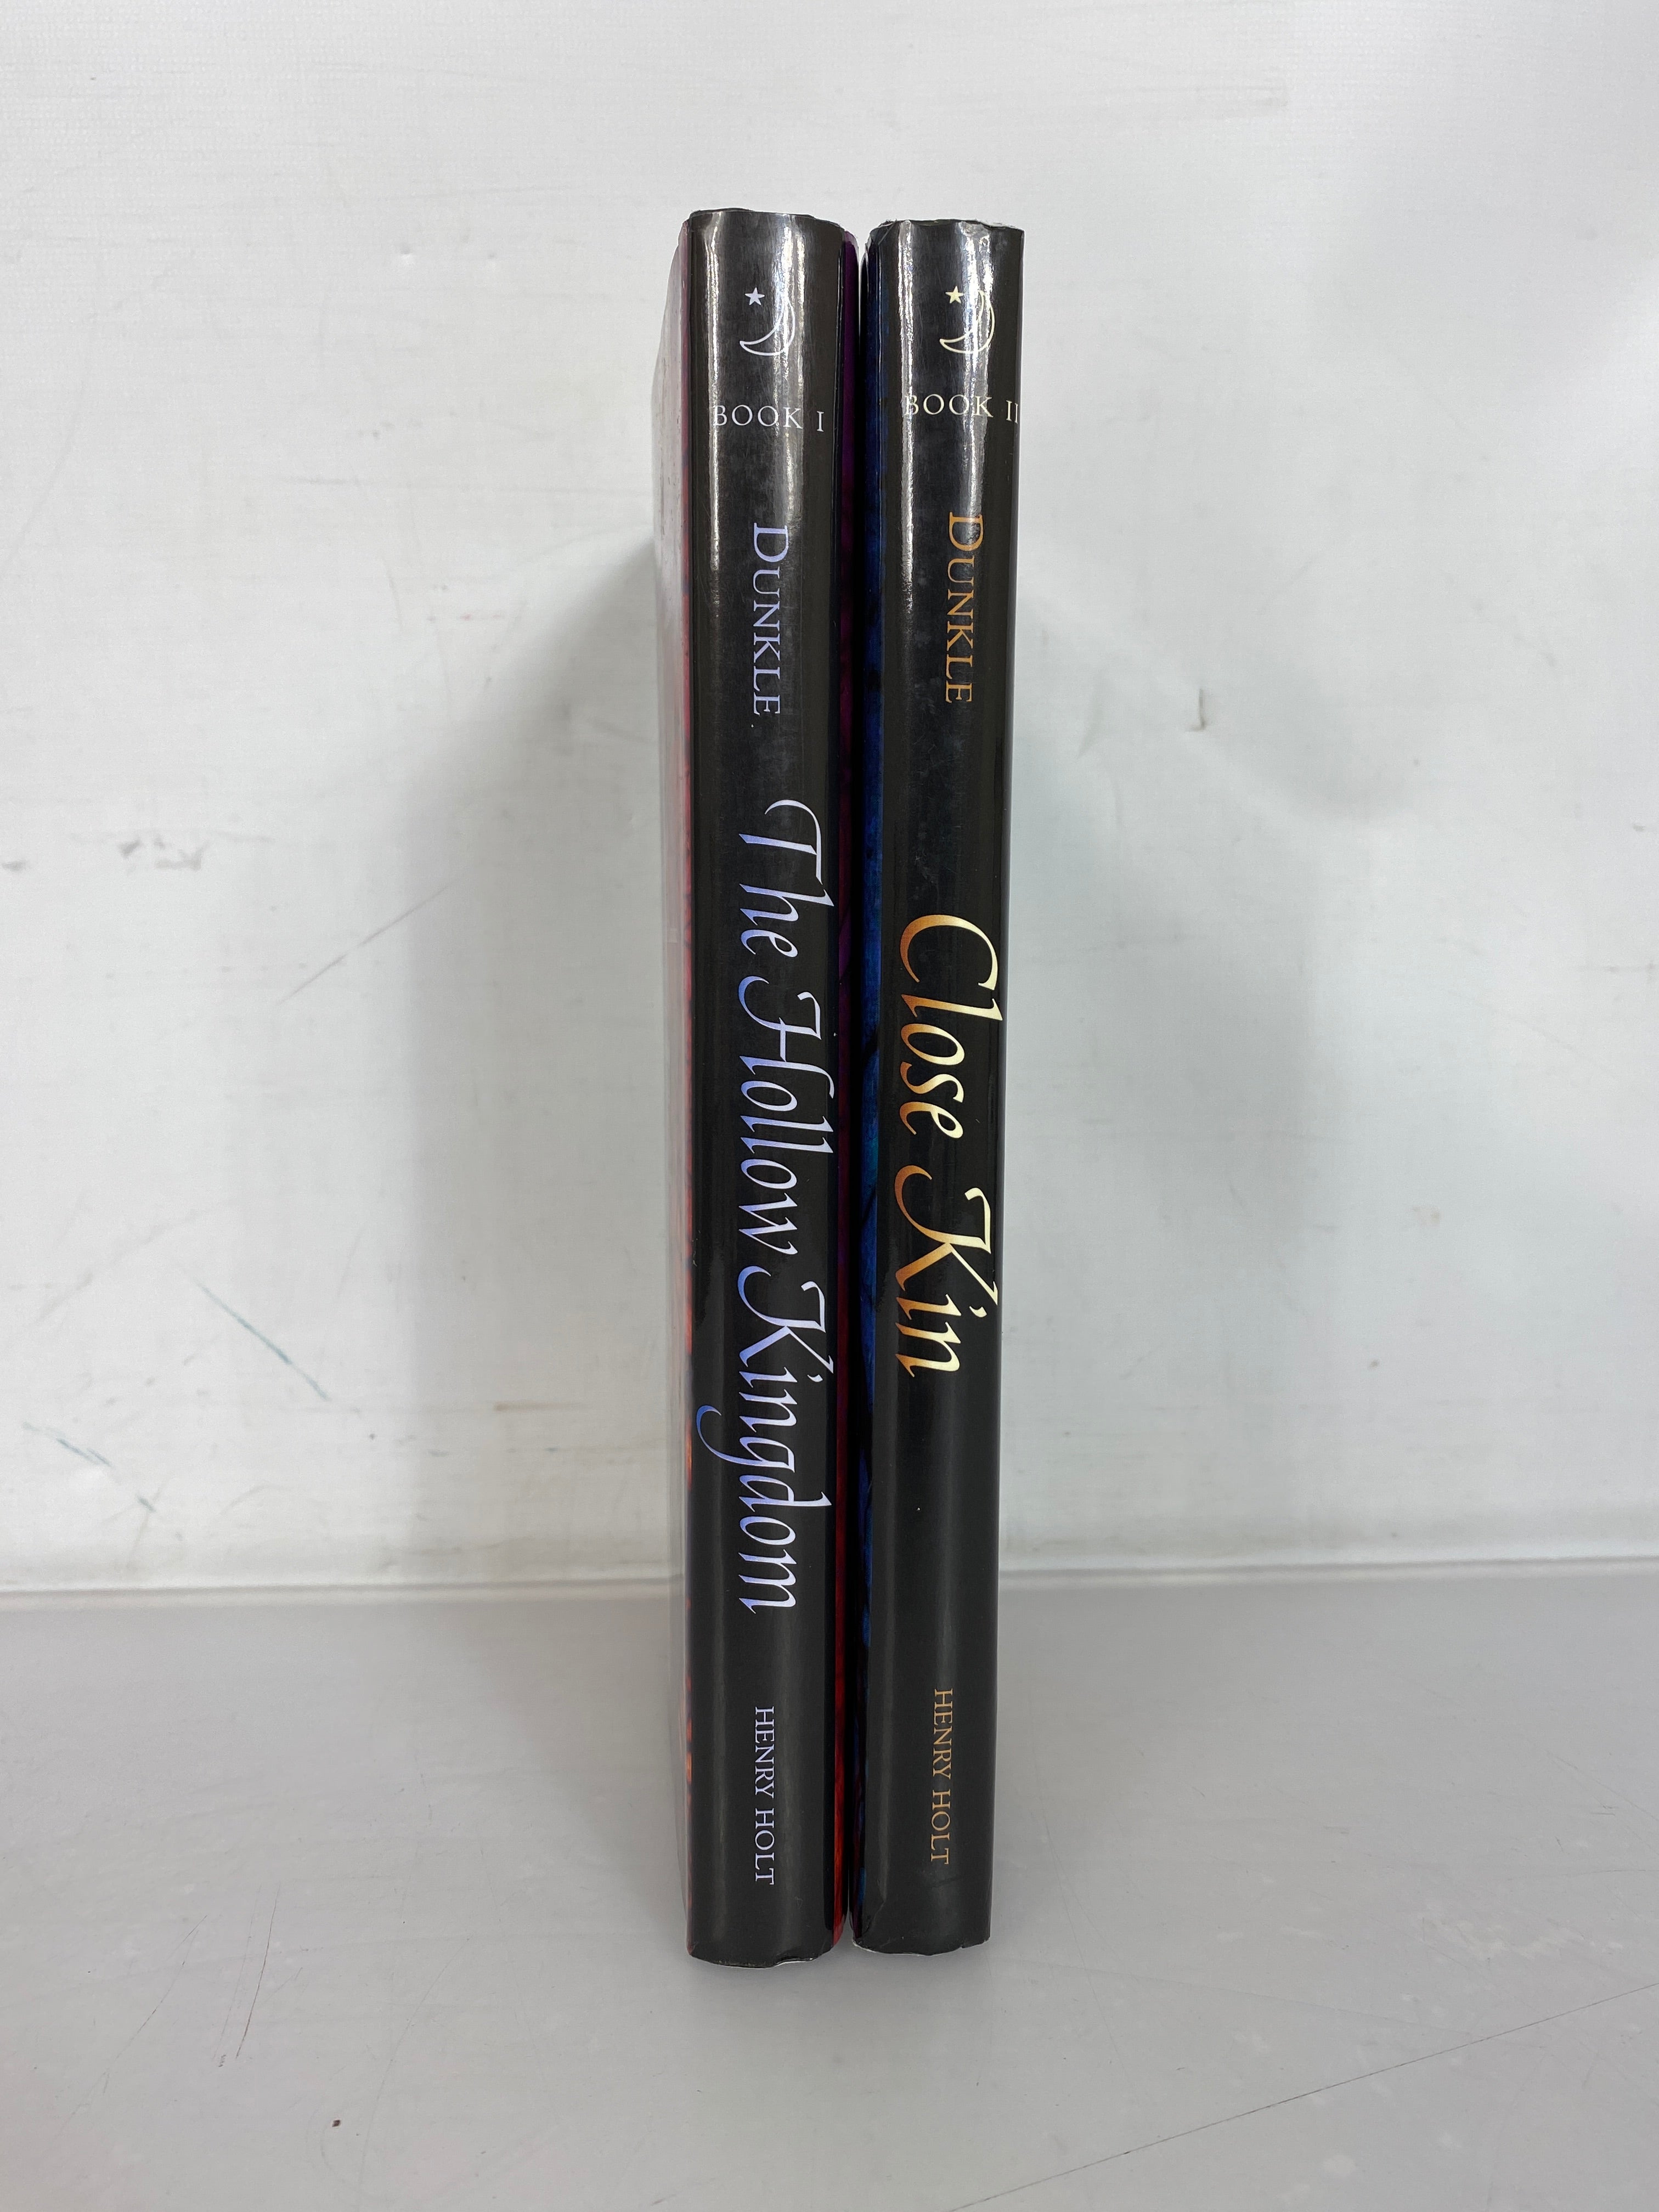 Lot of 2 Signed Copies Hollow Kingdom trilogy by Clare Dunkle to Matt Manley, Cover Artist HC DJ